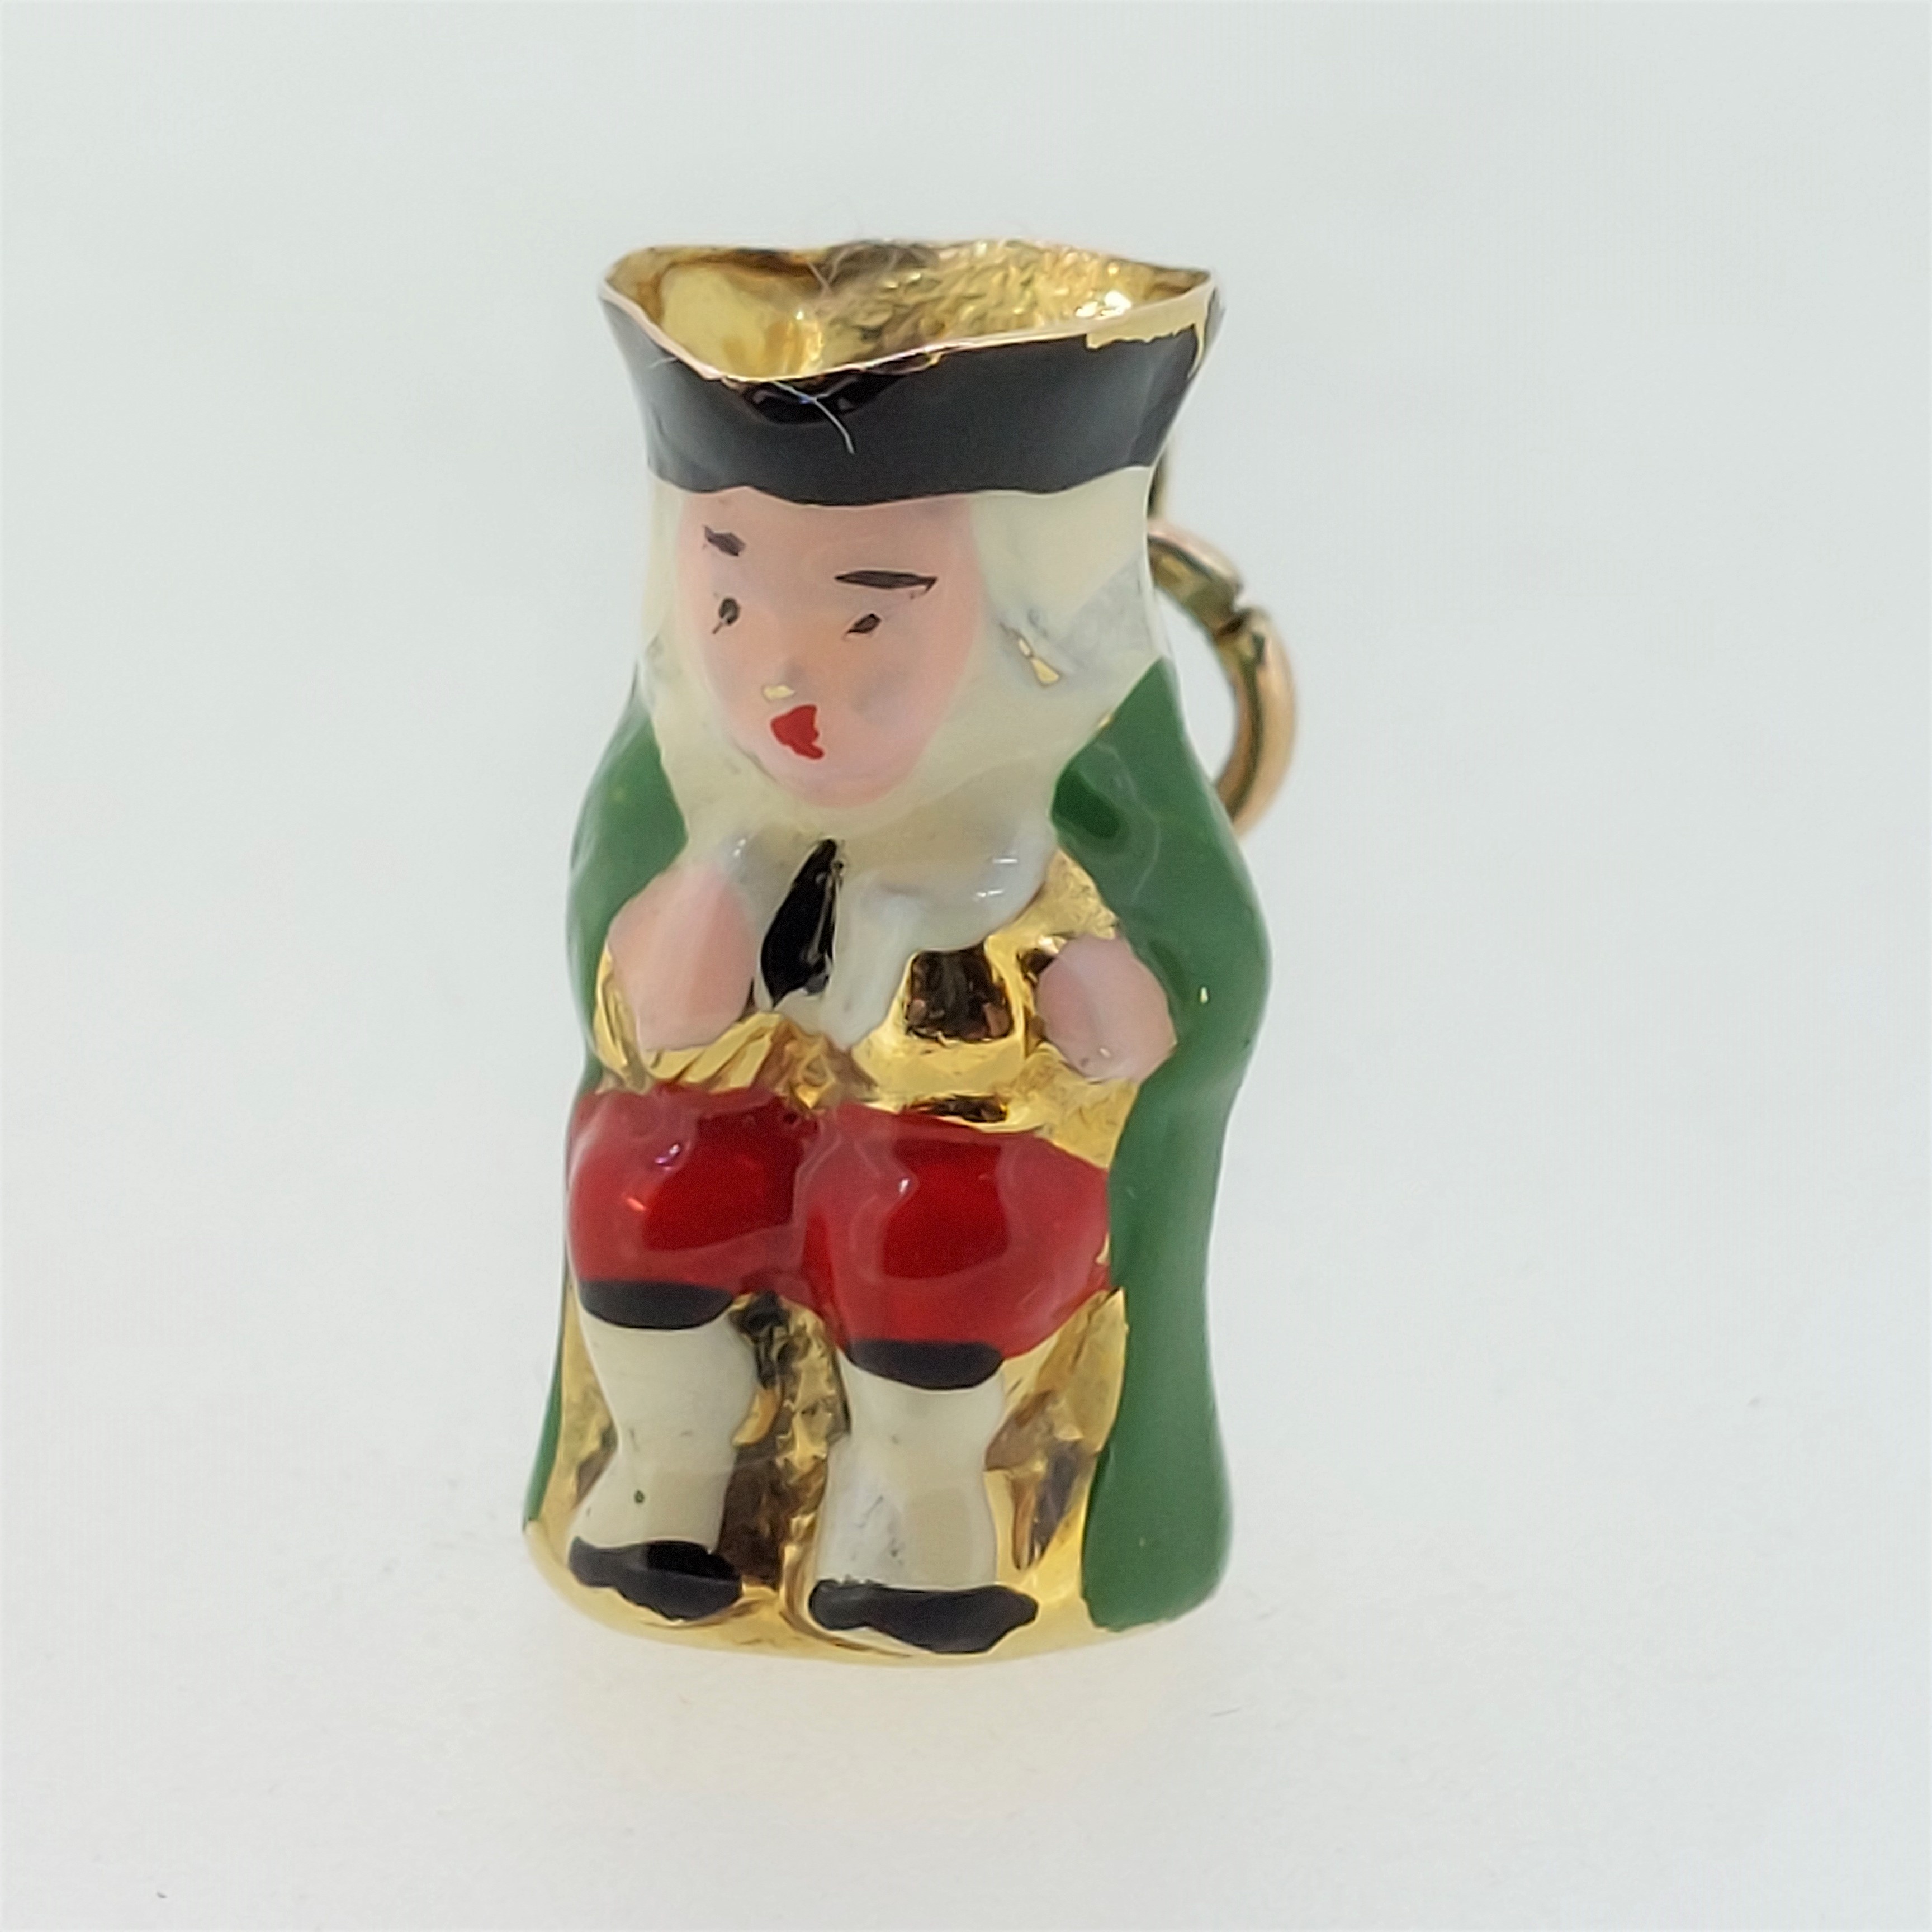 9ct Yellow Gold (375) Enamelled Toby Jug Charm Pendant - Image 8 of 8